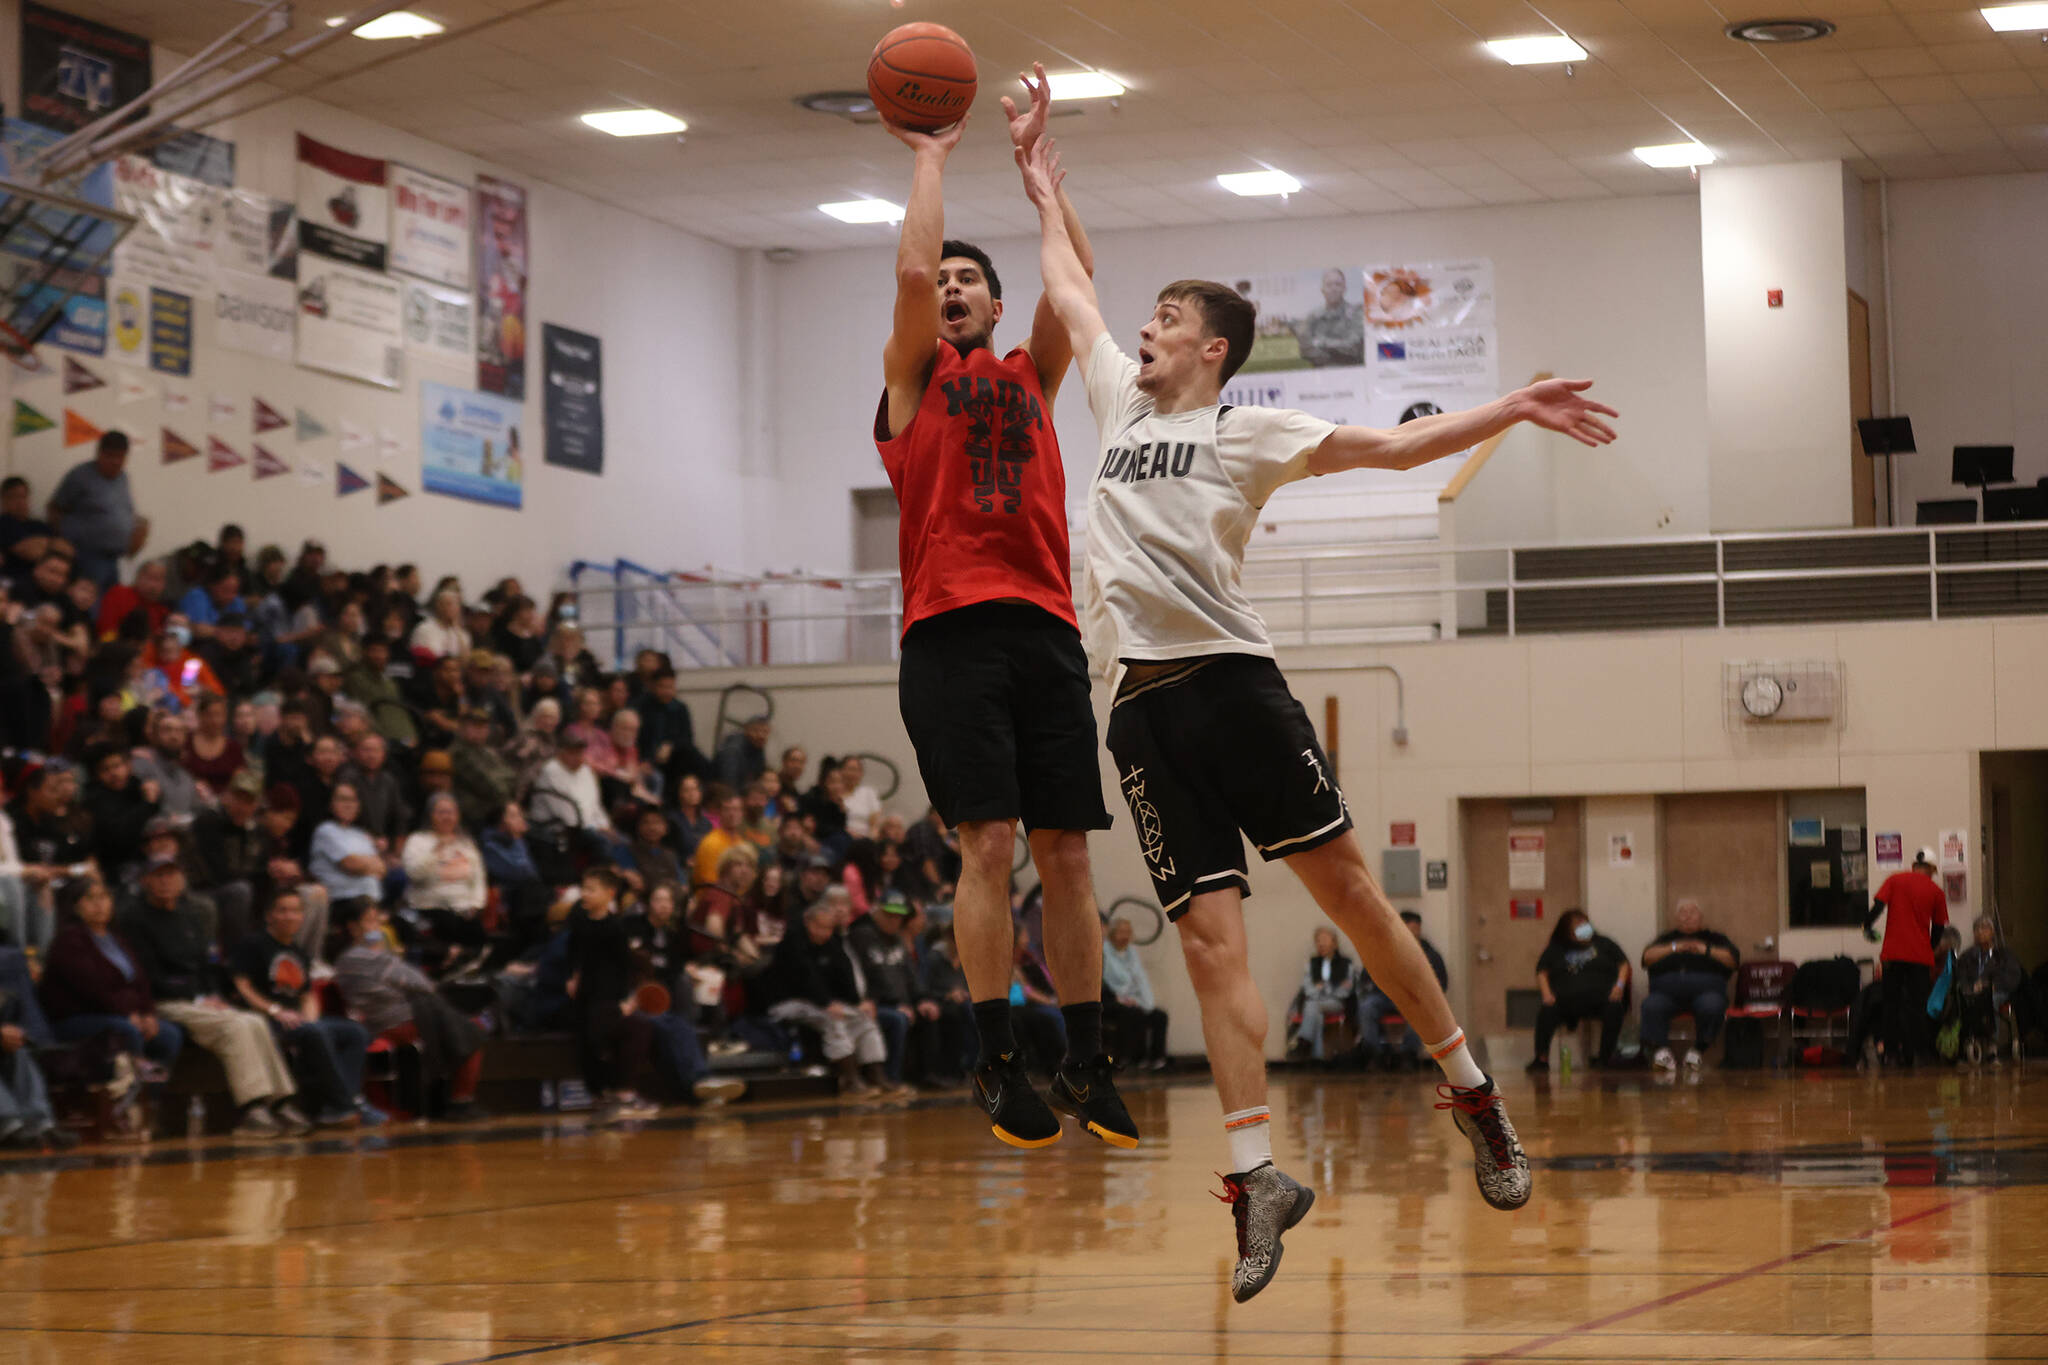 Hydaburg’s Darren Edenshaw shoots from deep while Juneau’s Kaleb Tompkins attempts to disrupt the shot. Edenshaw finished with a game-high 24 points, but Juneau left with an 86-70 victory and a B Bracket championship game berth. (Ben Hohenstatt / Juneau Empire)